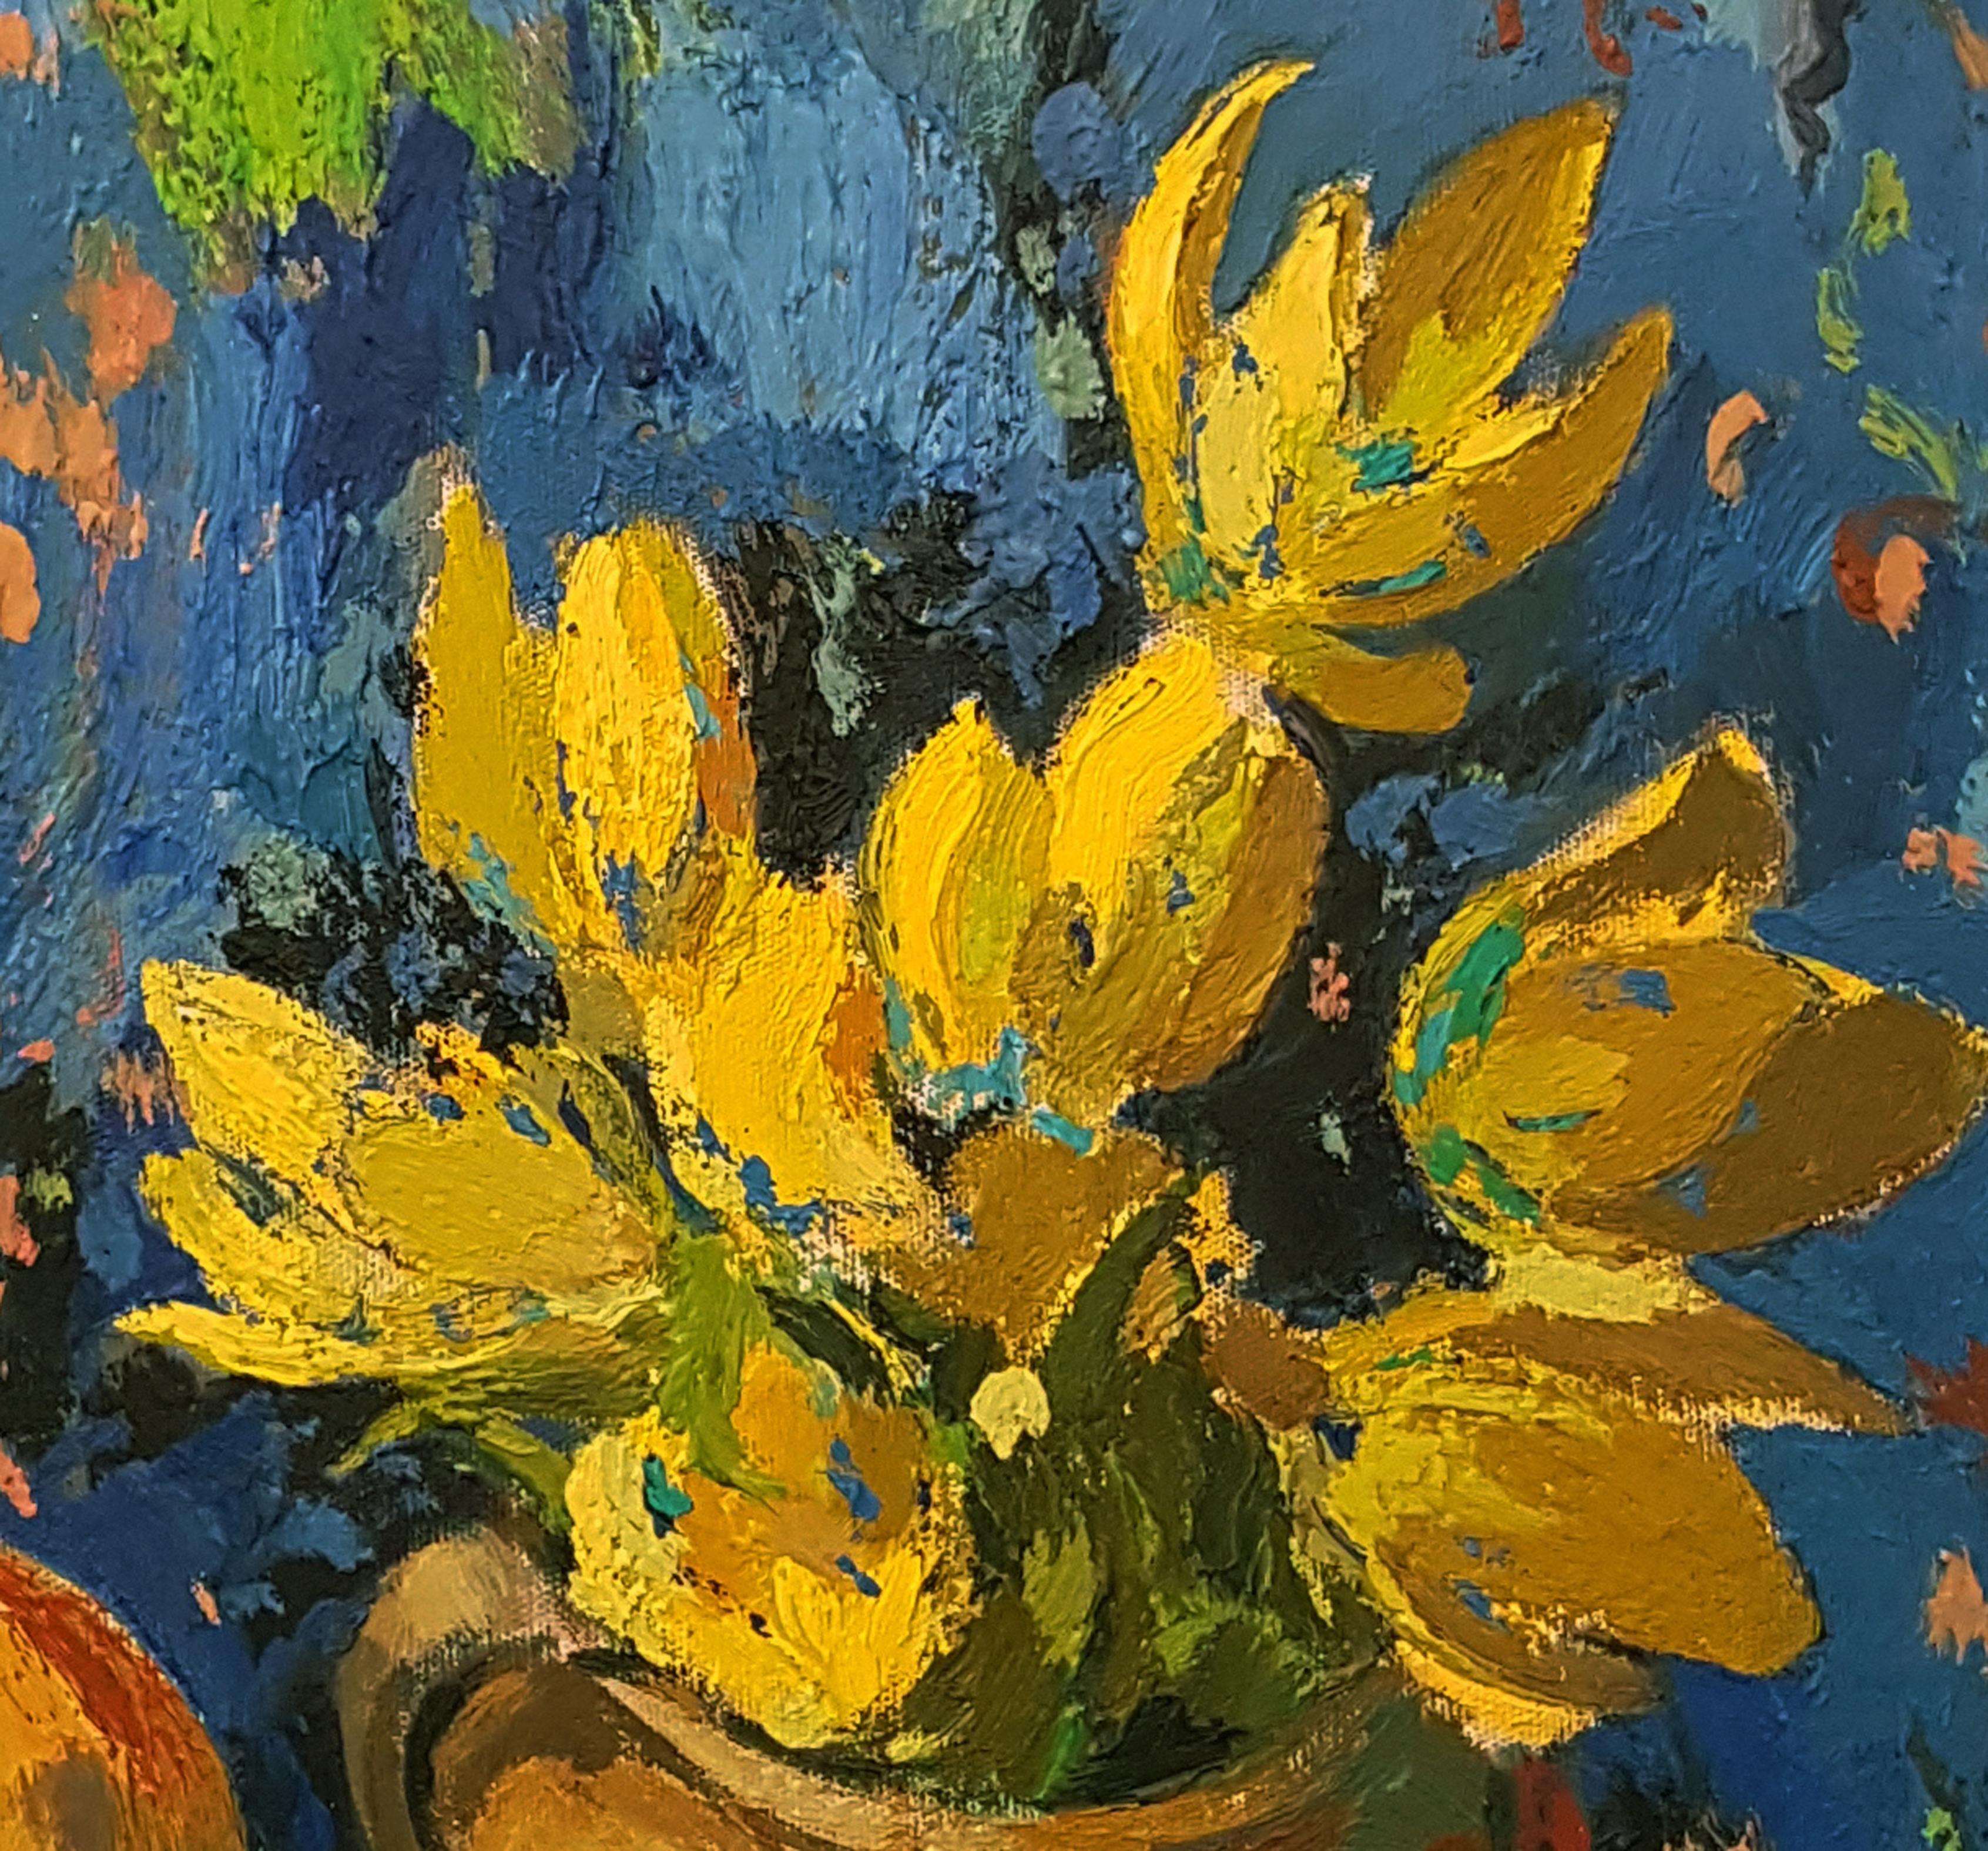 Artist: Ara H. Hakobyan
Work: Original Oil Painting, Handmade Artwork, One of a Kind
Medium: Oil on Canvas
Year: 2019
Style: Impressionism
Title: Still Life with Blue and Yellow
Size: 24